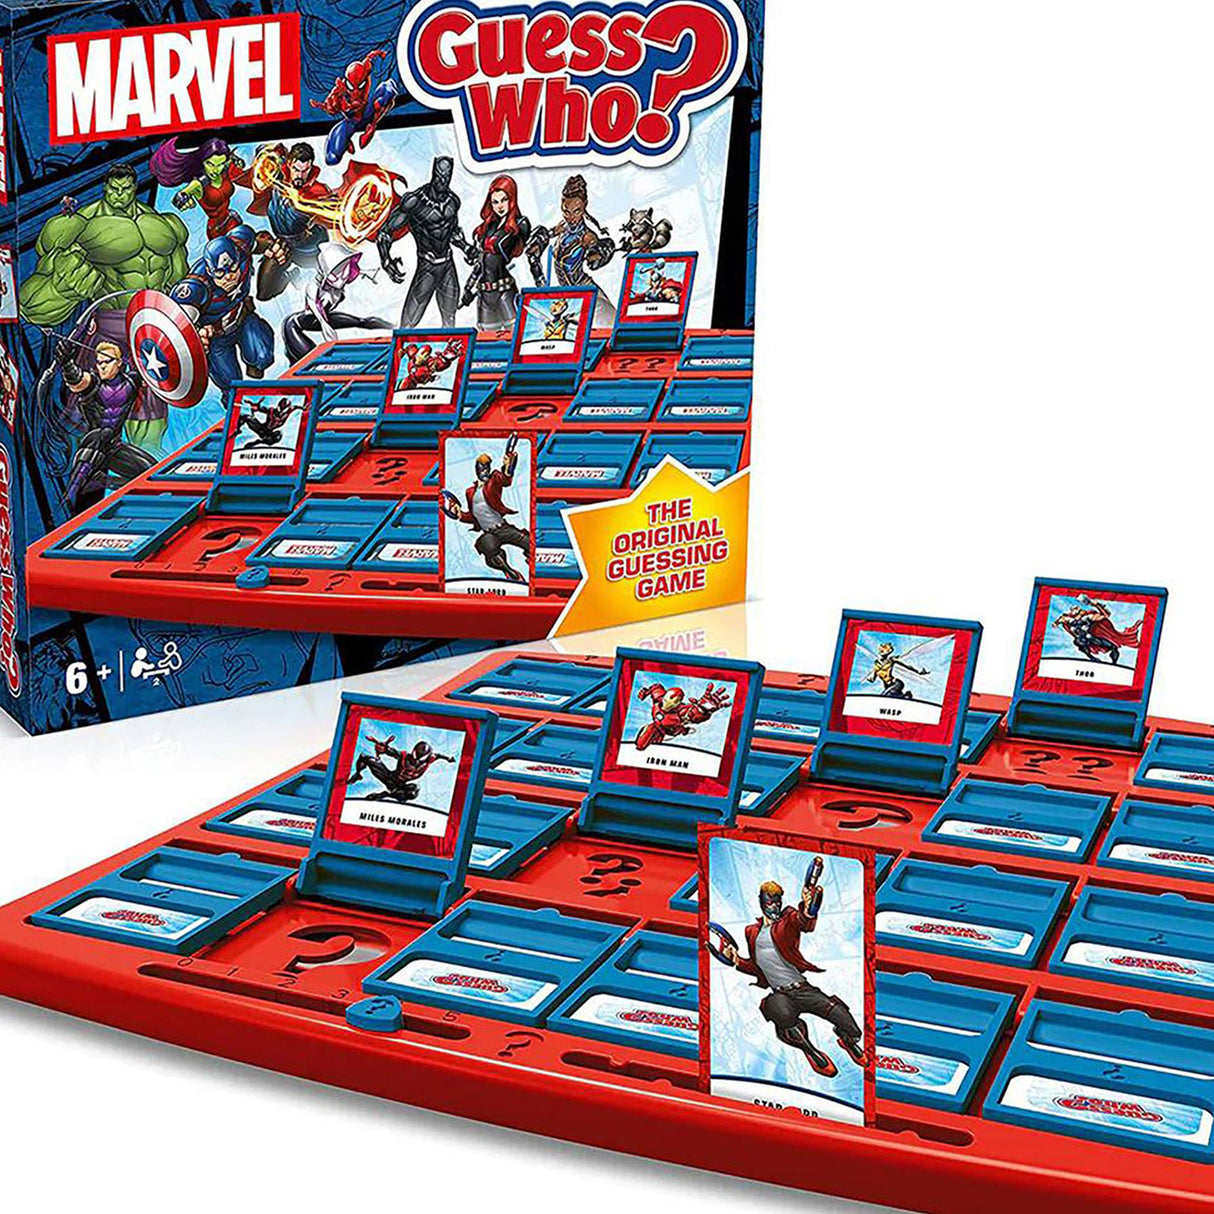 Marvel Guess Who